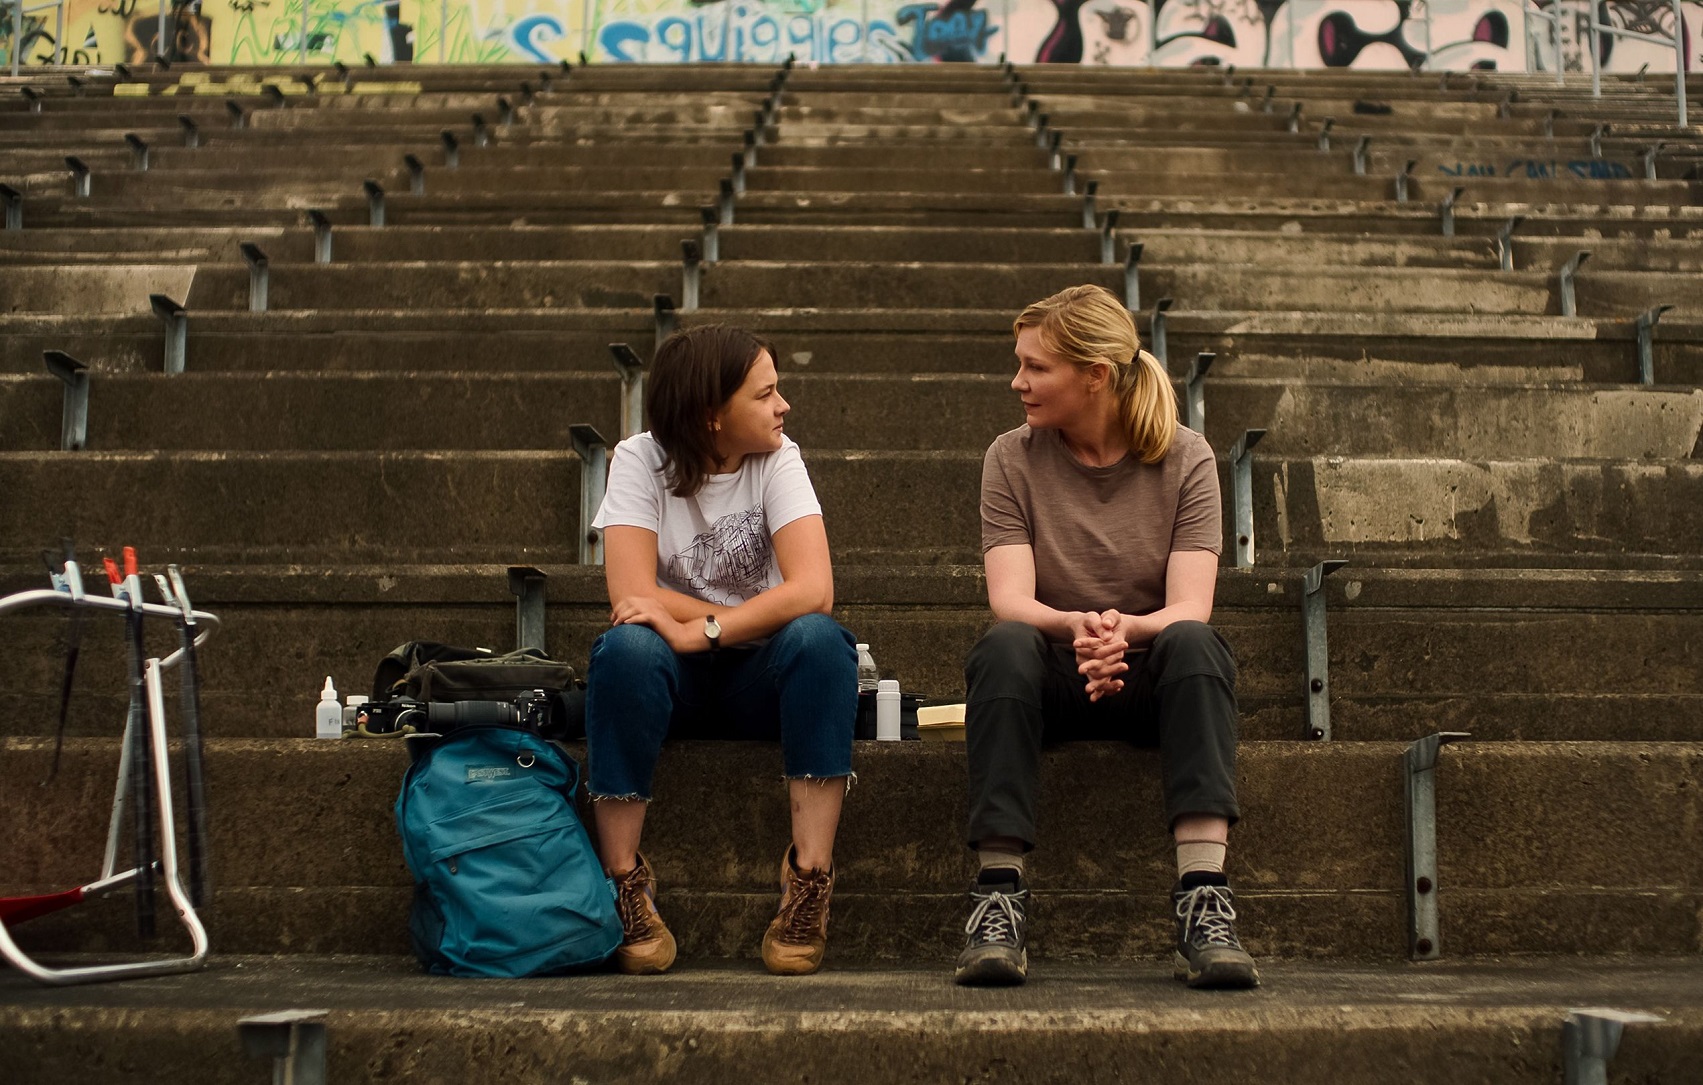 Cailee Spaeny (left) and Kirsten Dunst in Civil War. Photo: A24/TNS